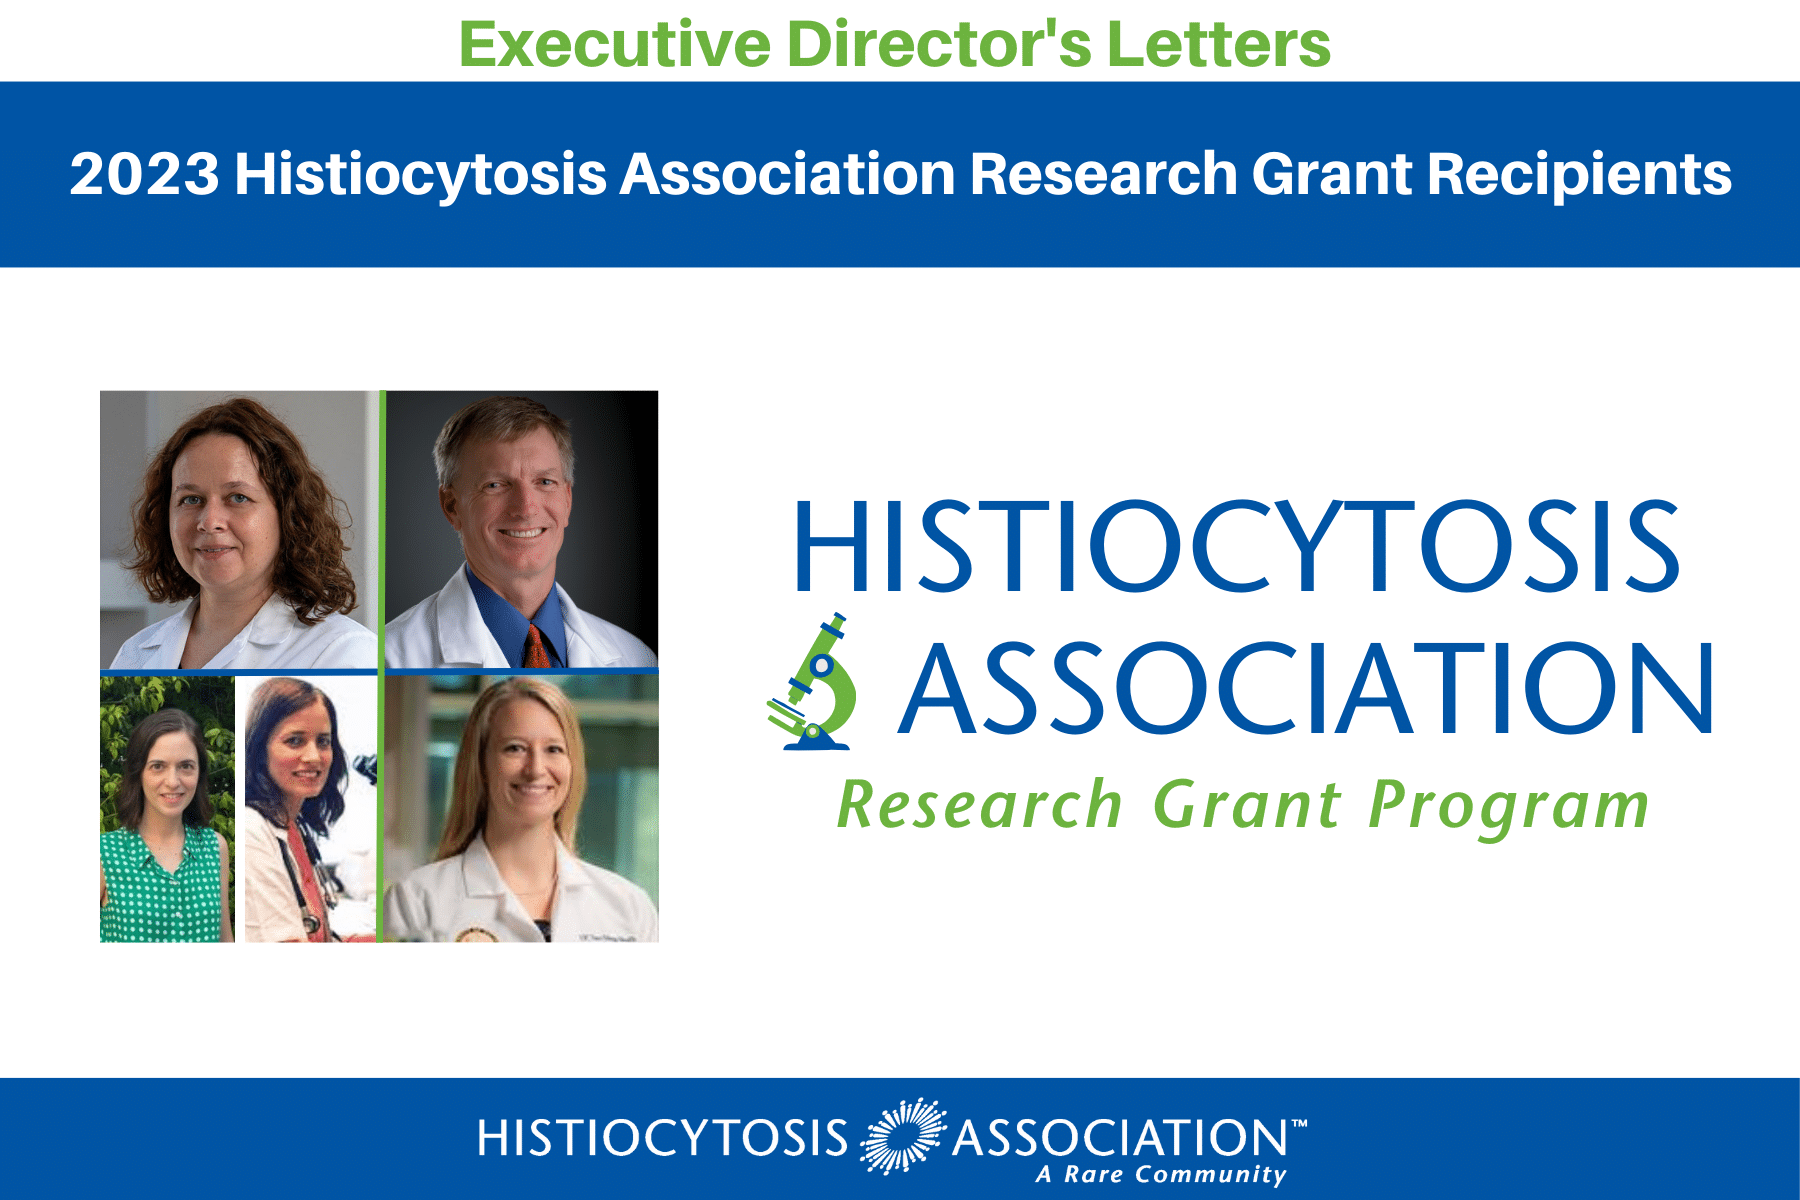 2023 Histiocytosis Association Research Grant Recipients Featured Photo. From left to right. Polina Shindiapina, Randy Cron, Ruthy Shiloh & Sarah Elitzur, and Nicole Coufal